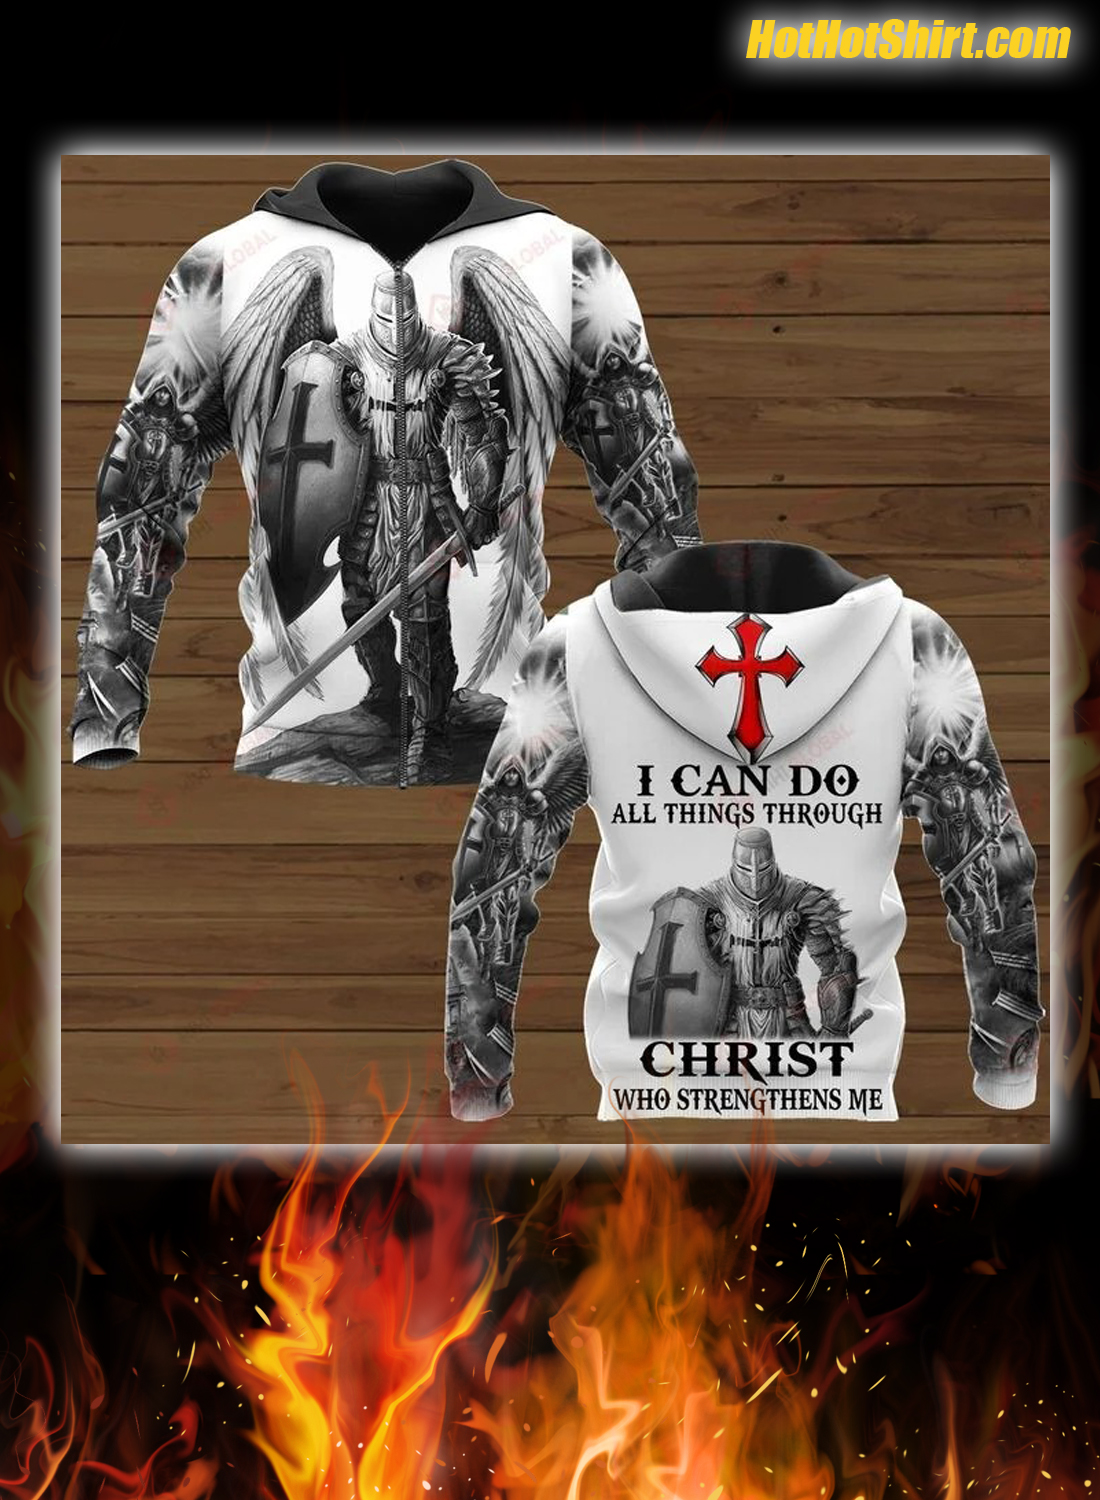 Knights Templar I Can Do All Things Through Christ Who Strengthens Me 3D Hoodie and Shirt 1